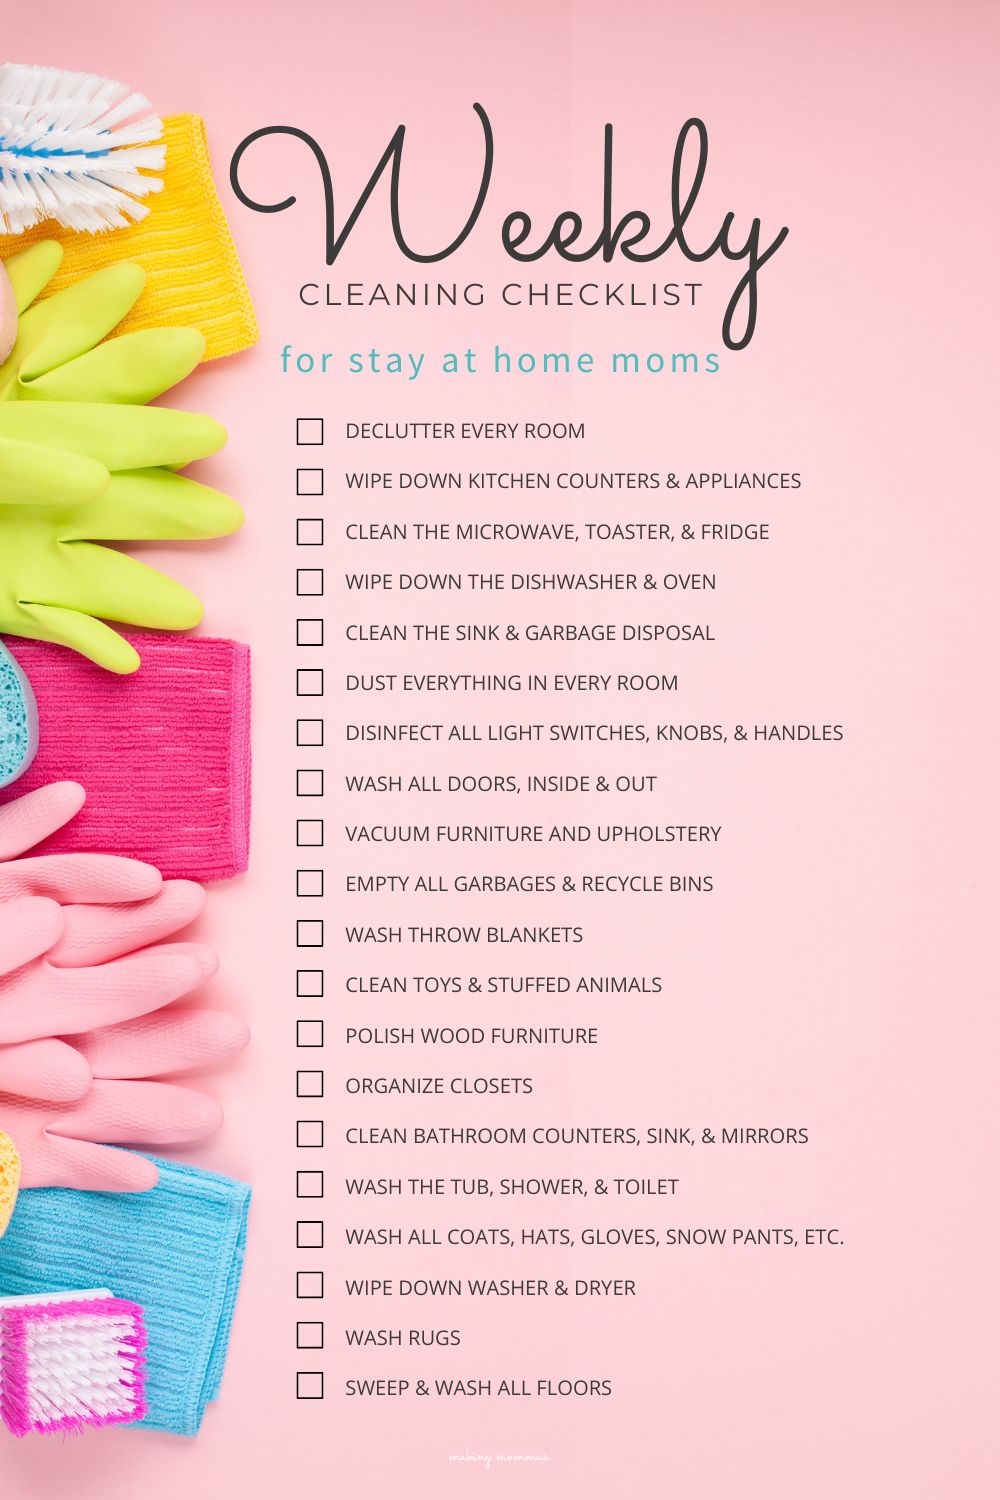 pin image of a weekly cleaning checklist for stay at home moms
